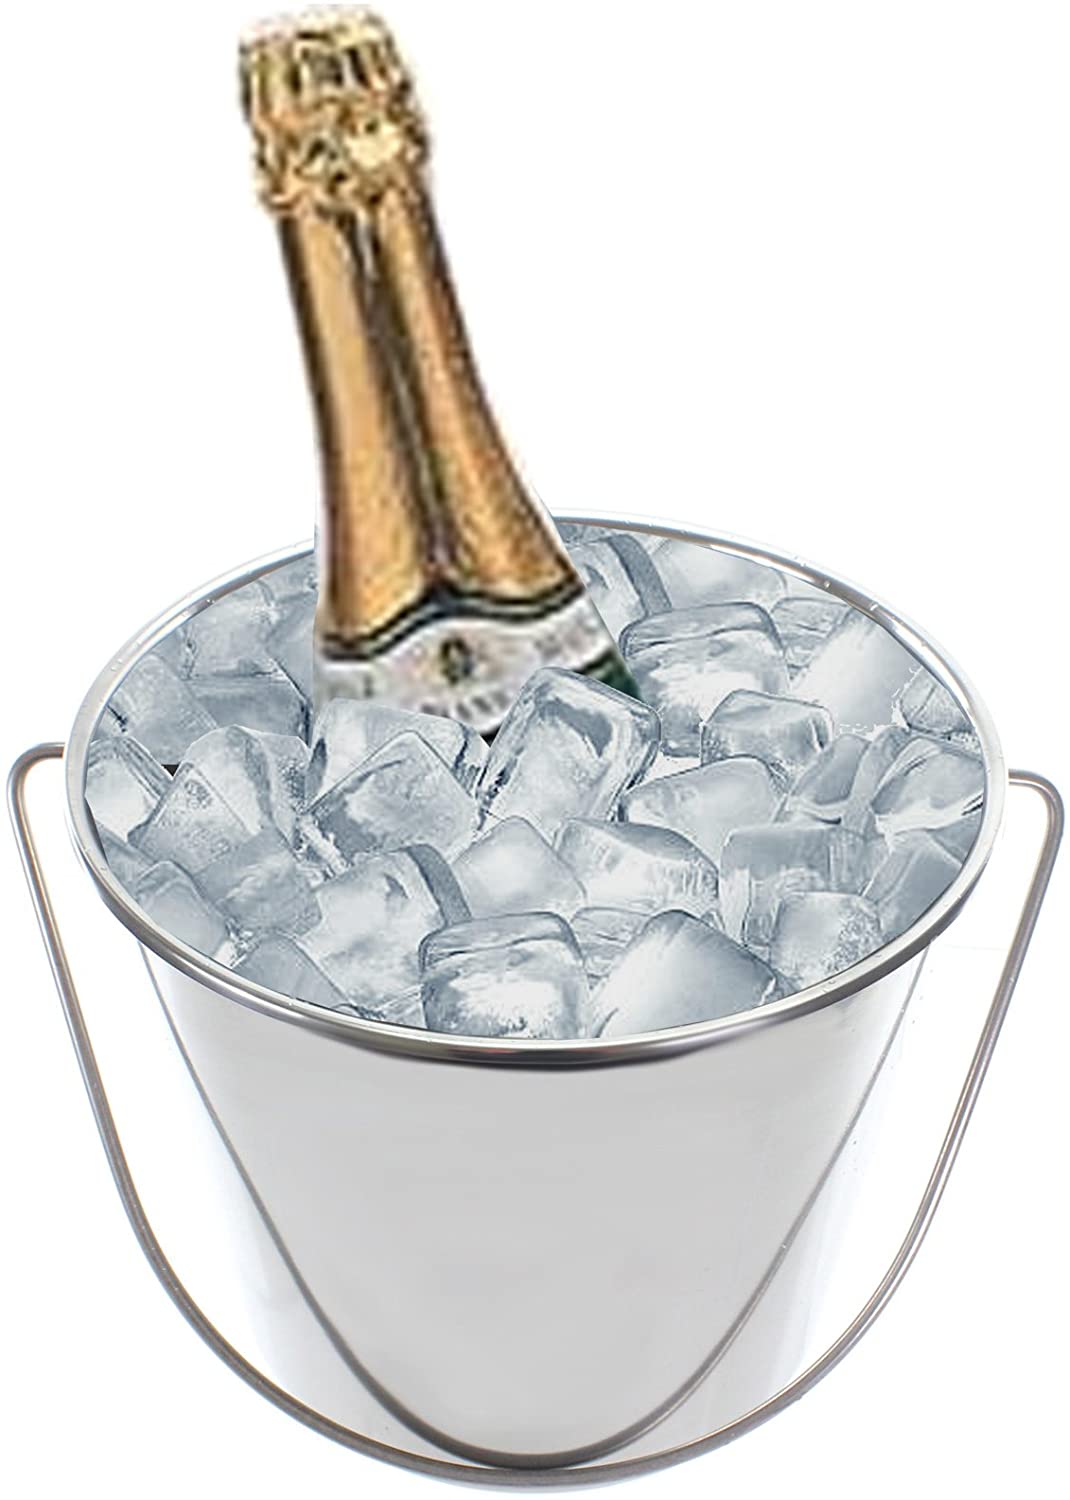 12 Litre Stainless Steel Bucket Champagen on Ice